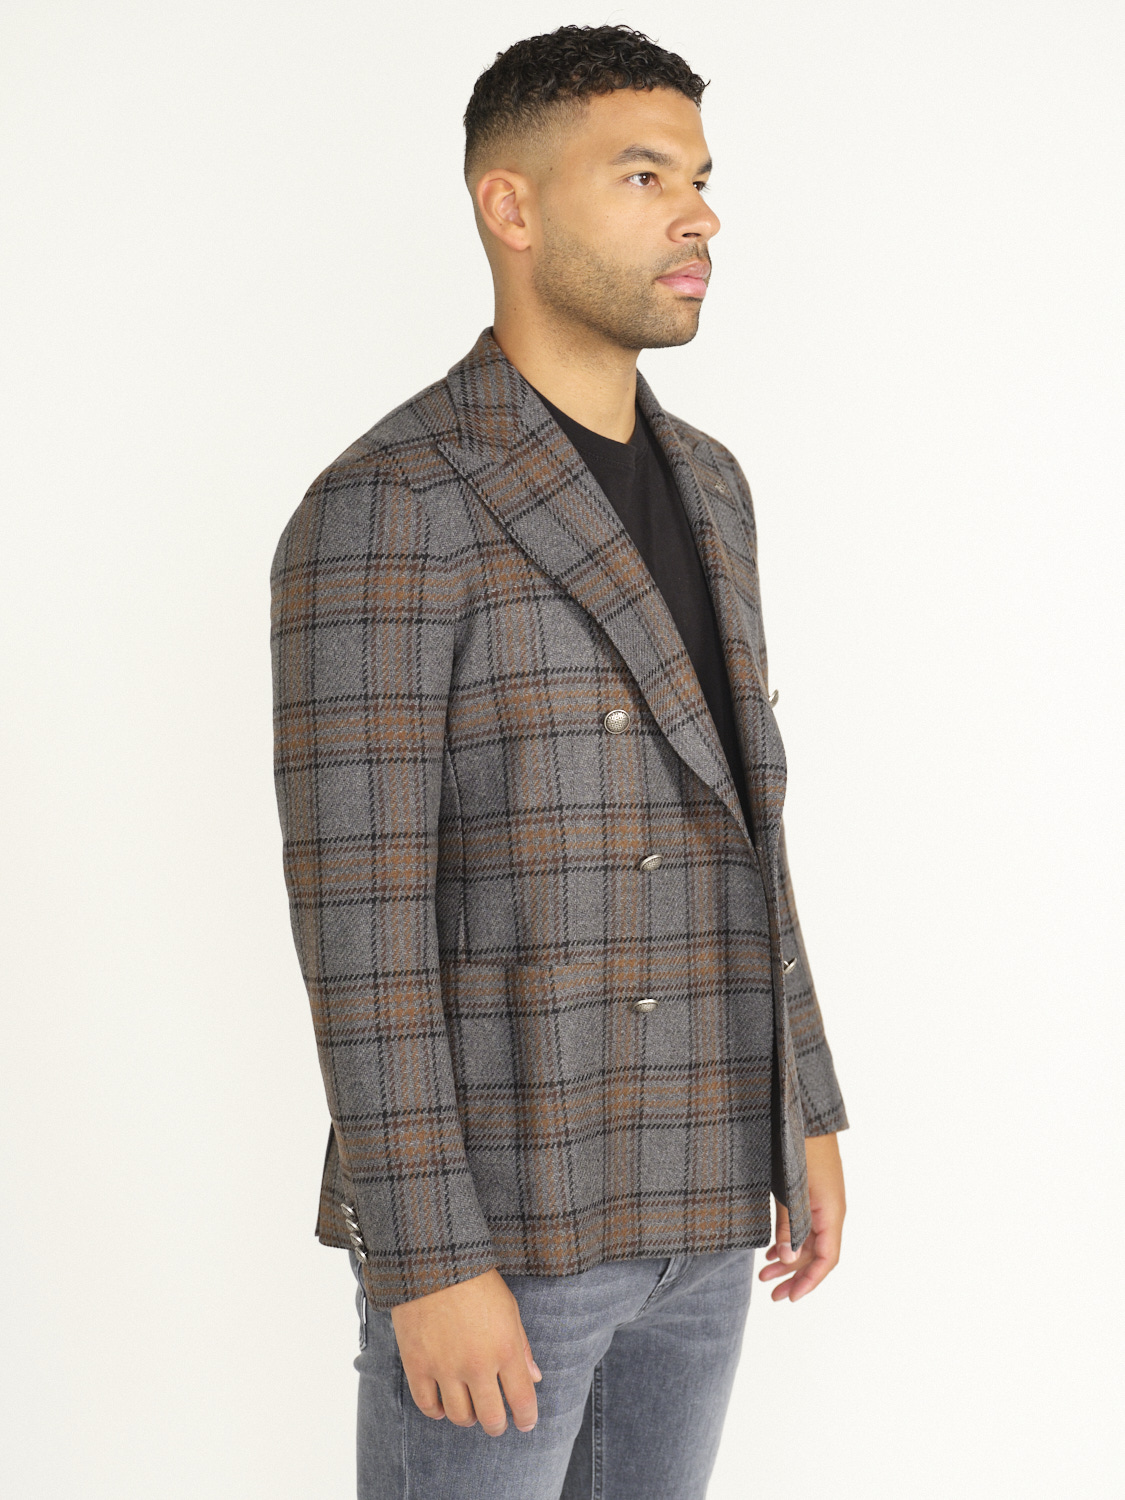 TAGLIATORE Jacket with checked pattern in virgin wool grey 52